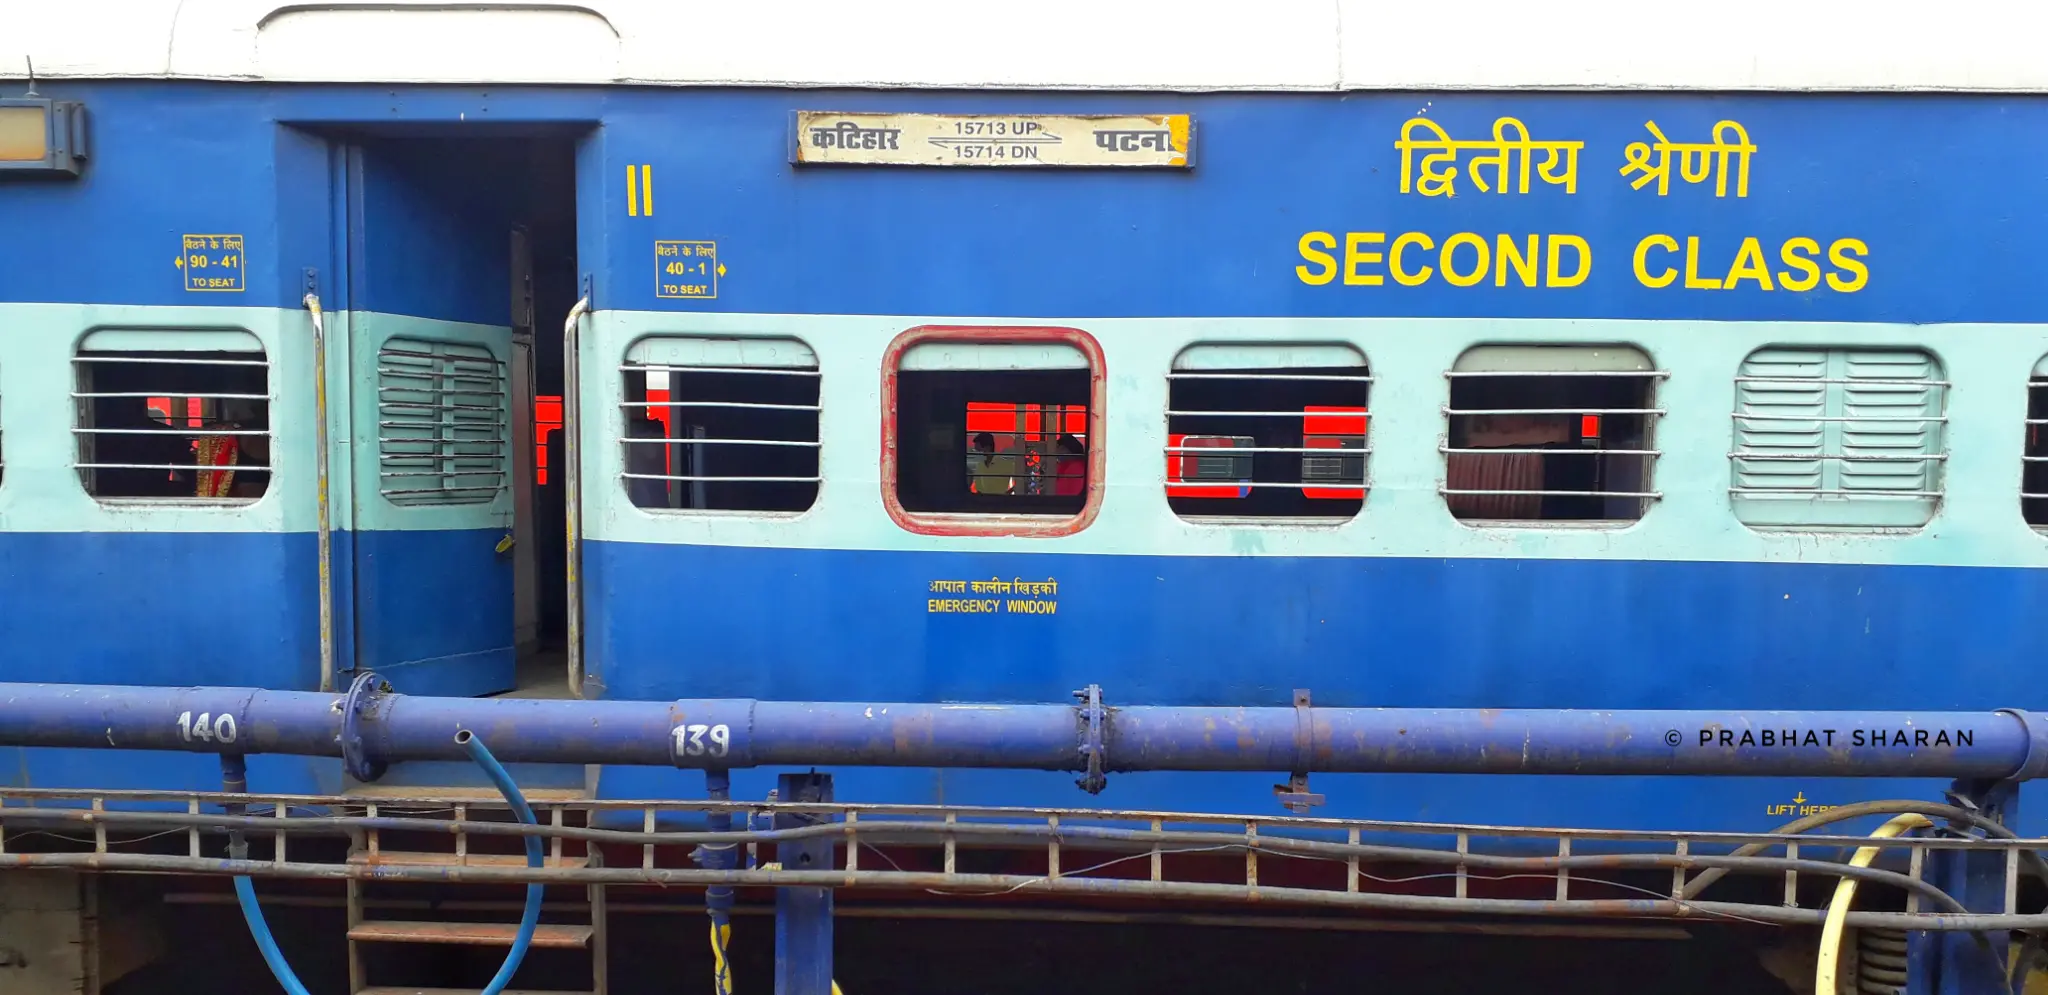 With the running of Intercity Express from the new route from October 1, its timetable is also likely to change.